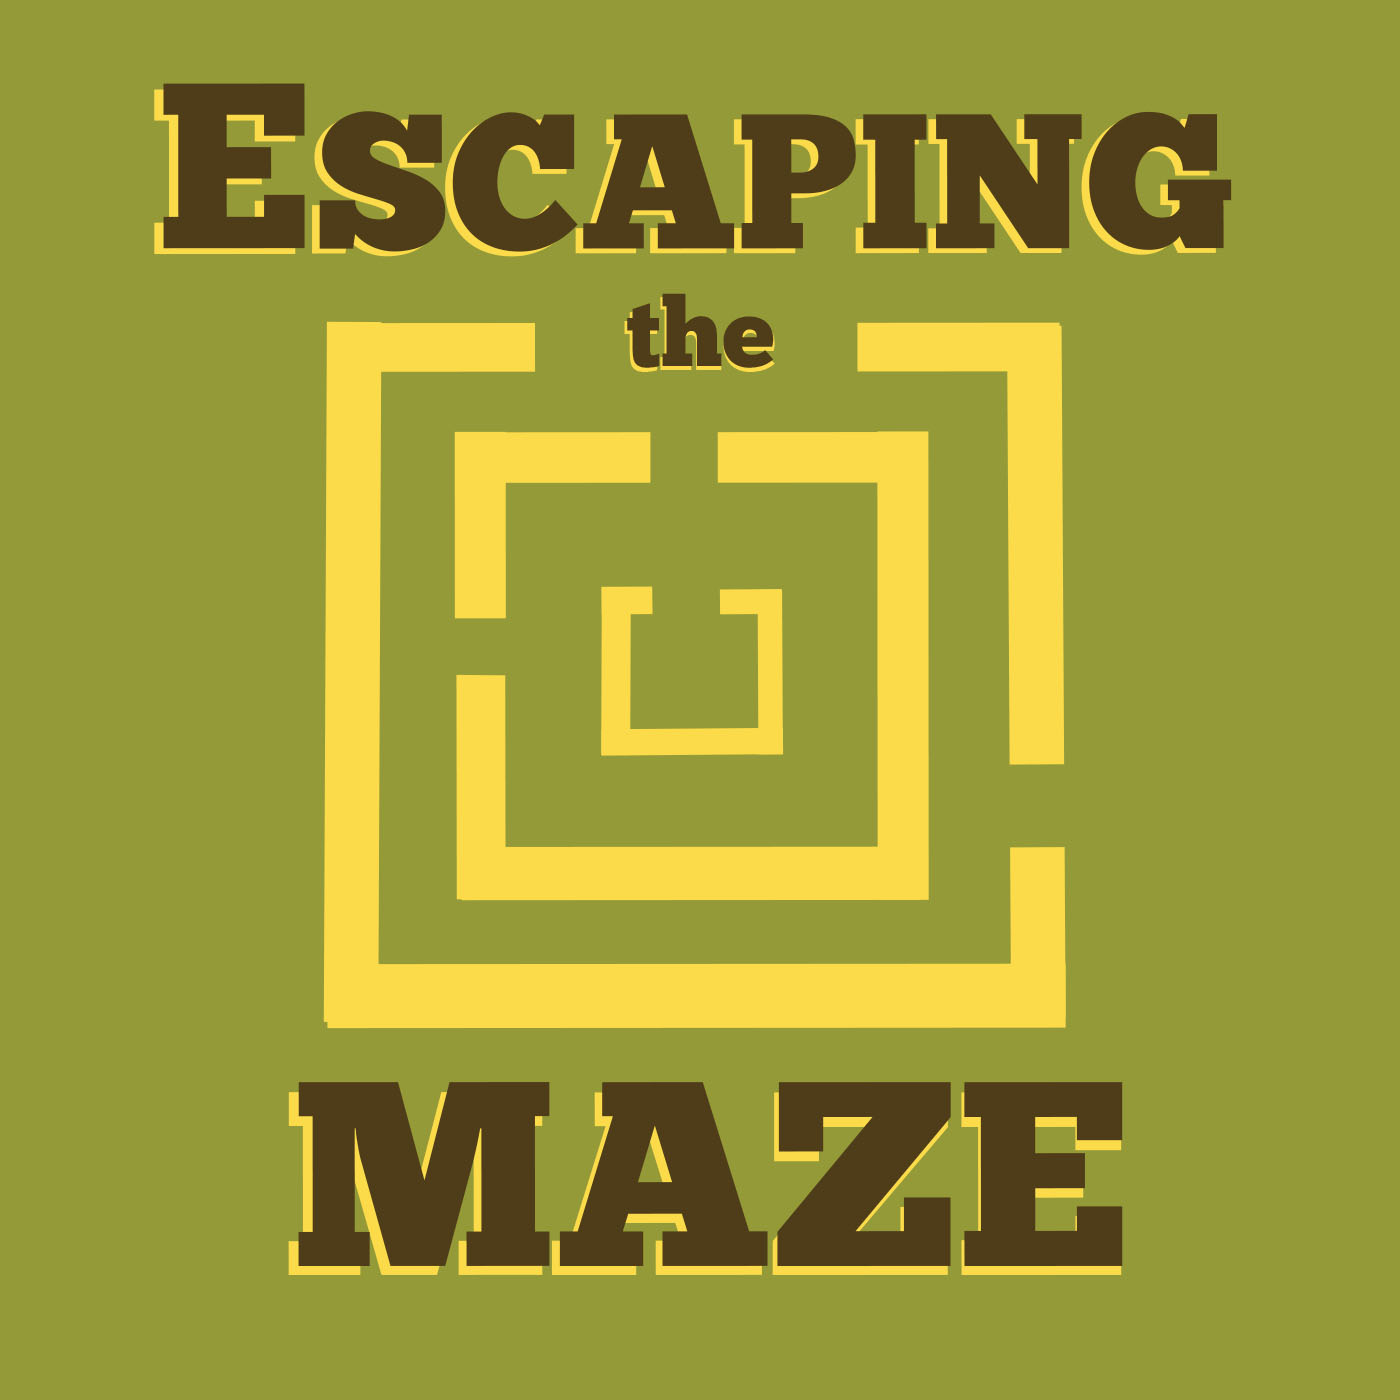 Escaping the Maze Podcast - A podcast devoted to prodigal sons and daughters through Biblical Scripture and commentary on news, politics, even entertainment as signs